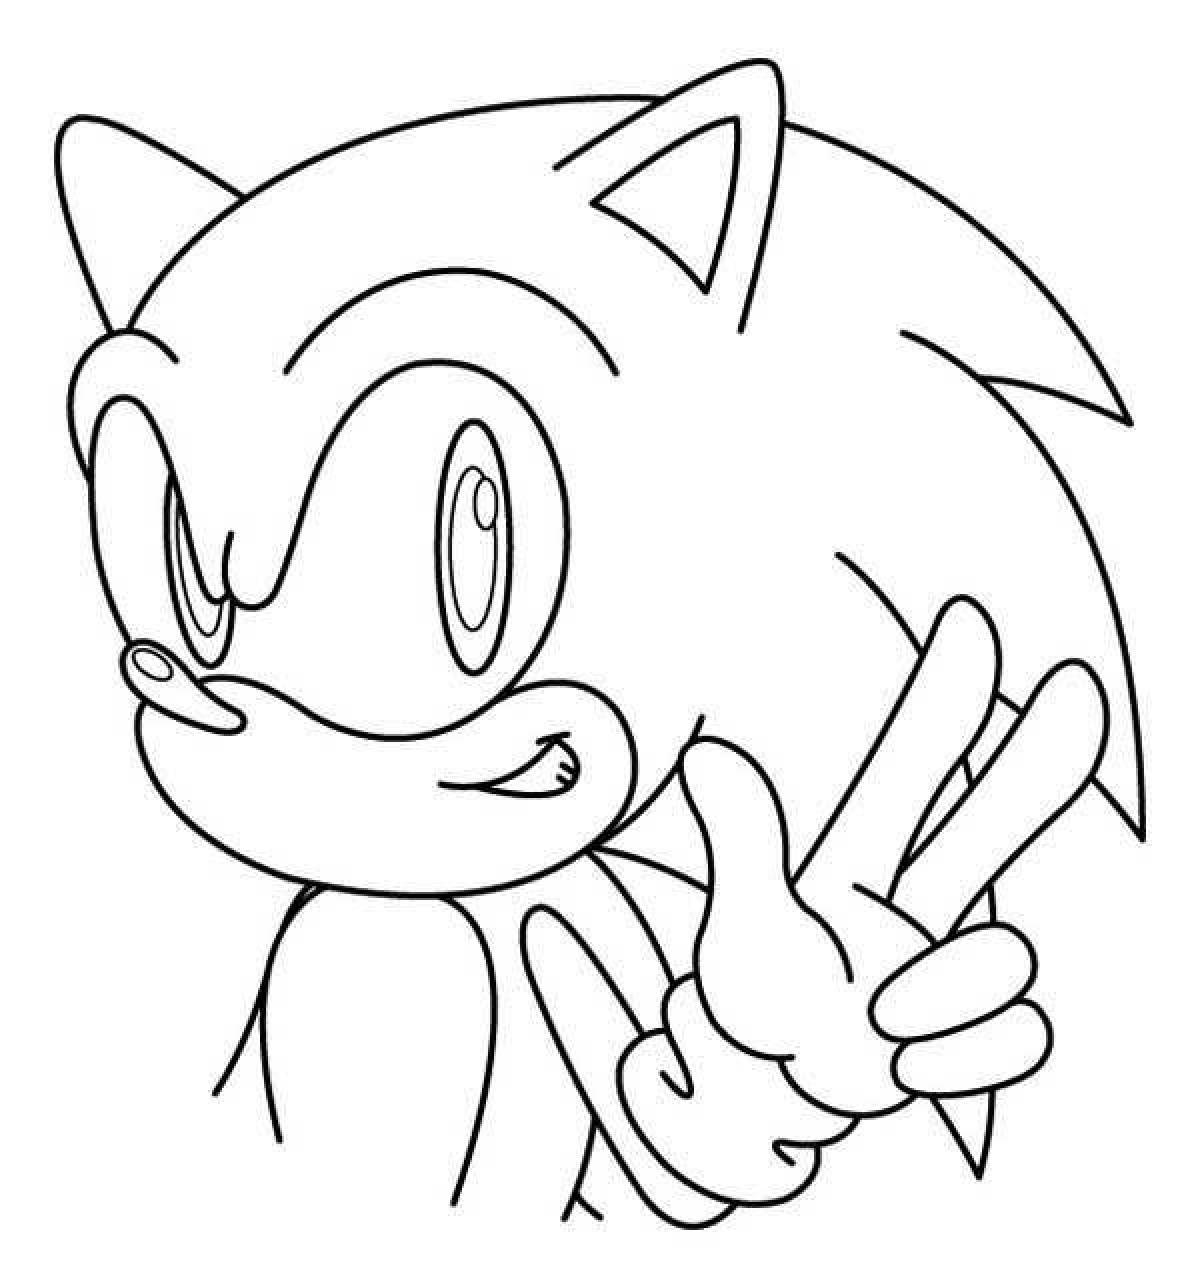 Coloring bold xs sonic